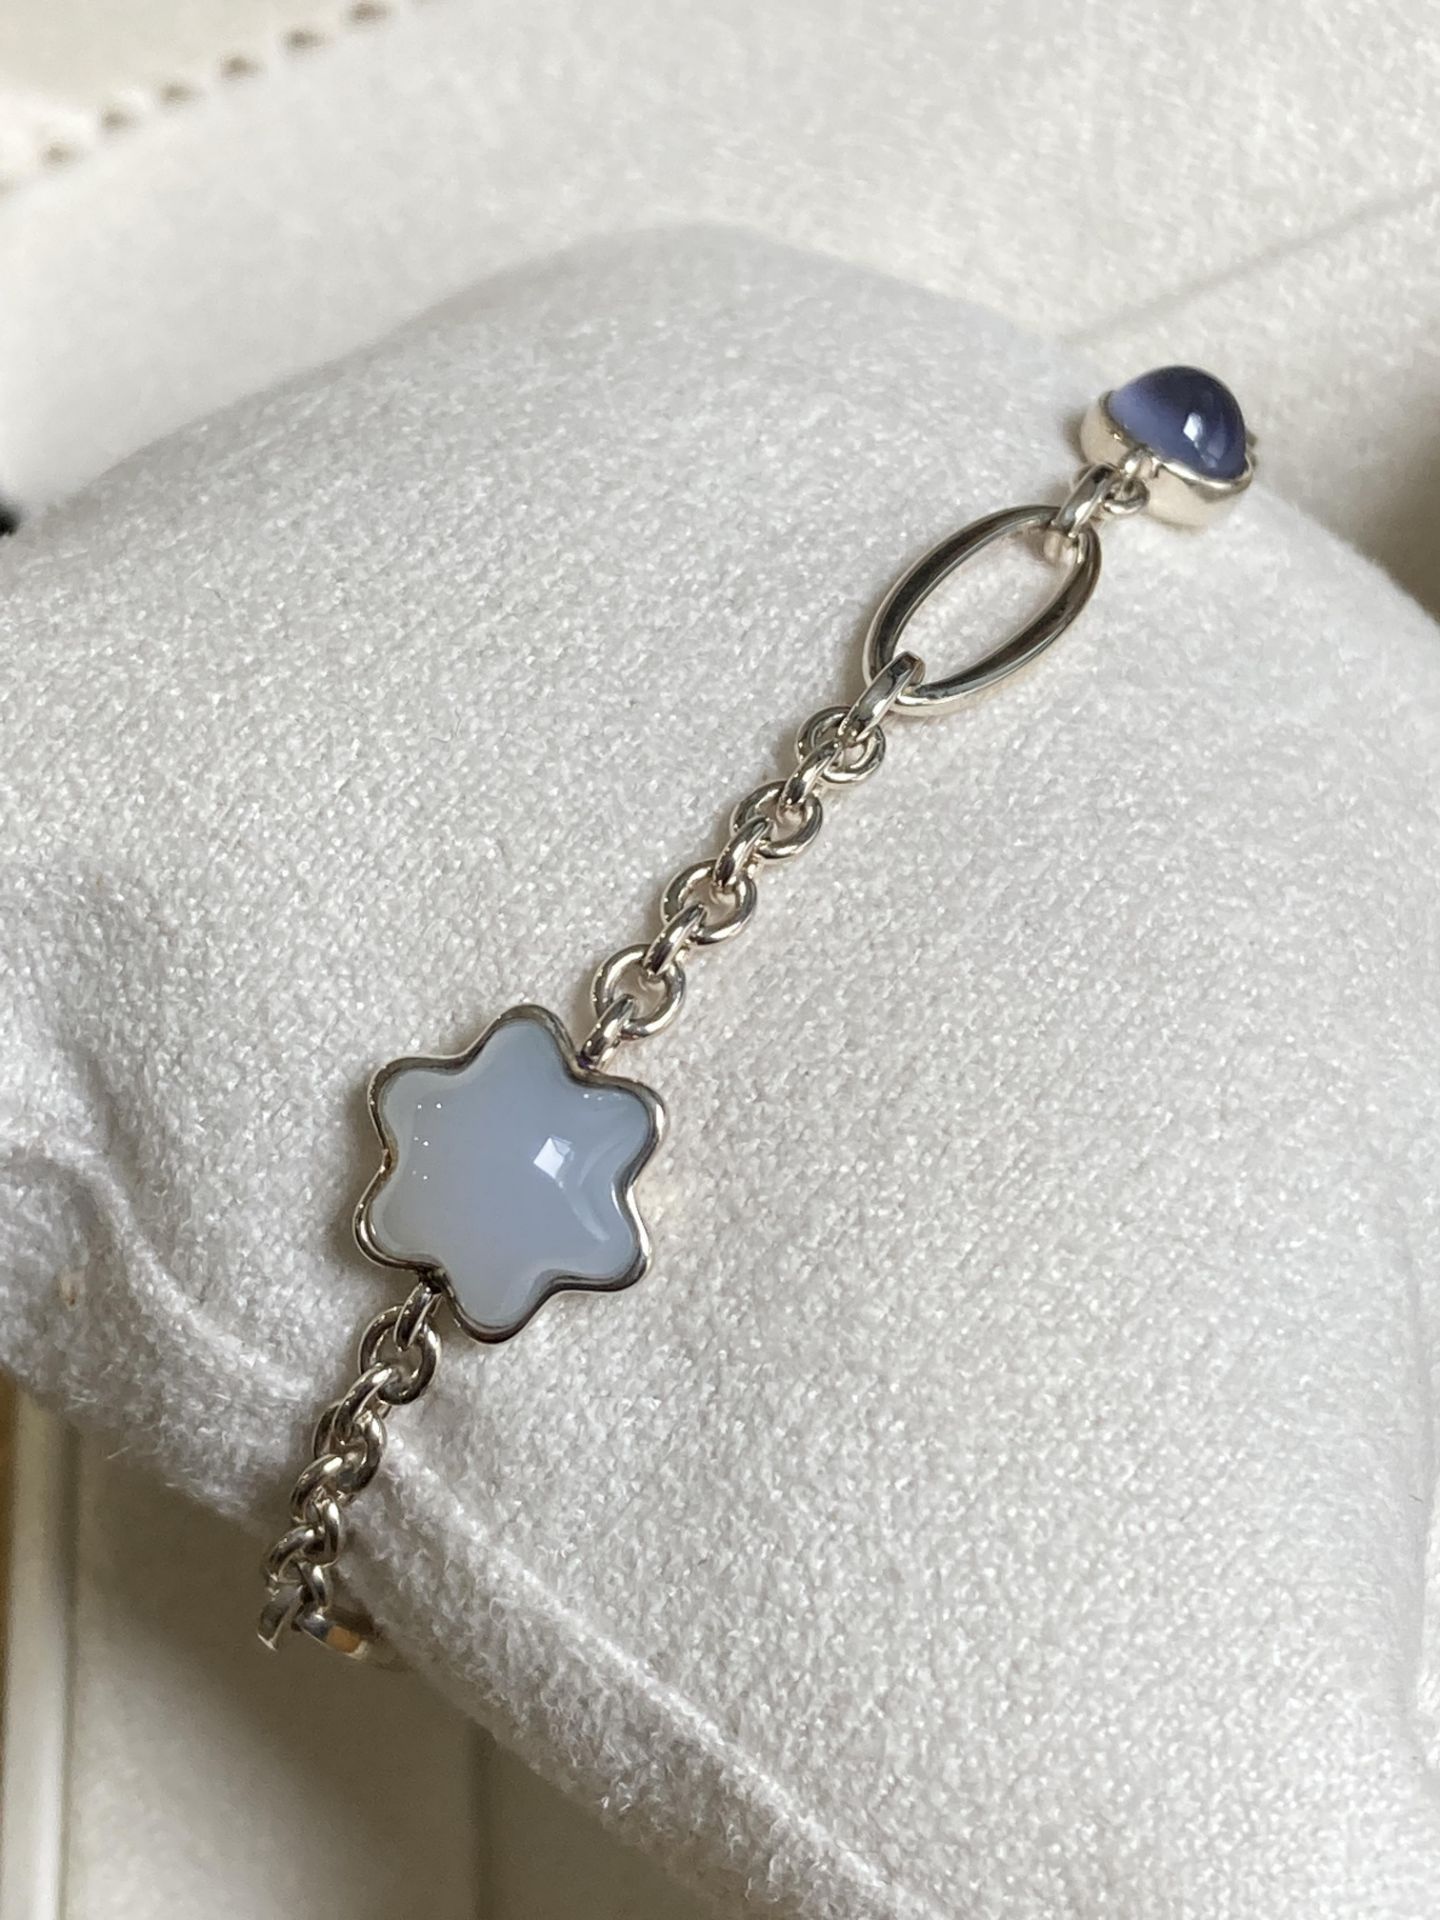 MONT BLANC STERLING SILVER 925 BRACELET WITH CABOCHONS (BOXED) - Image 4 of 7